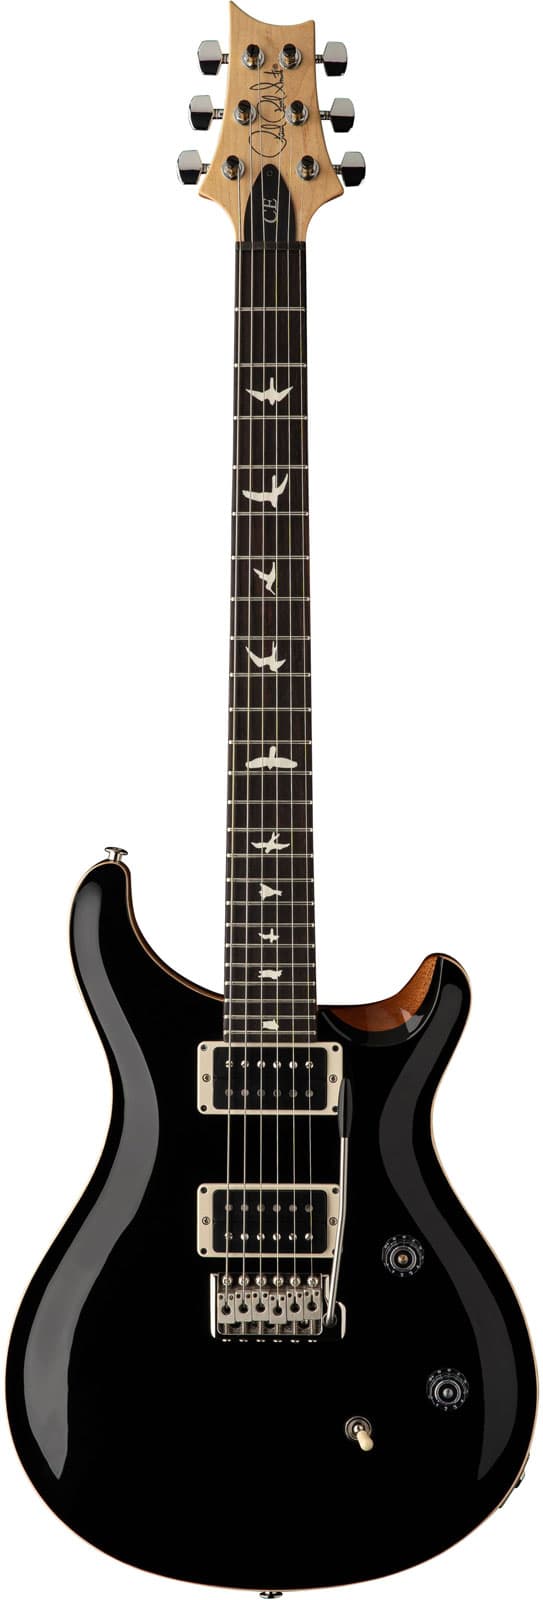 PRS - PAUL REED SMITH CE24 BLACK TOP